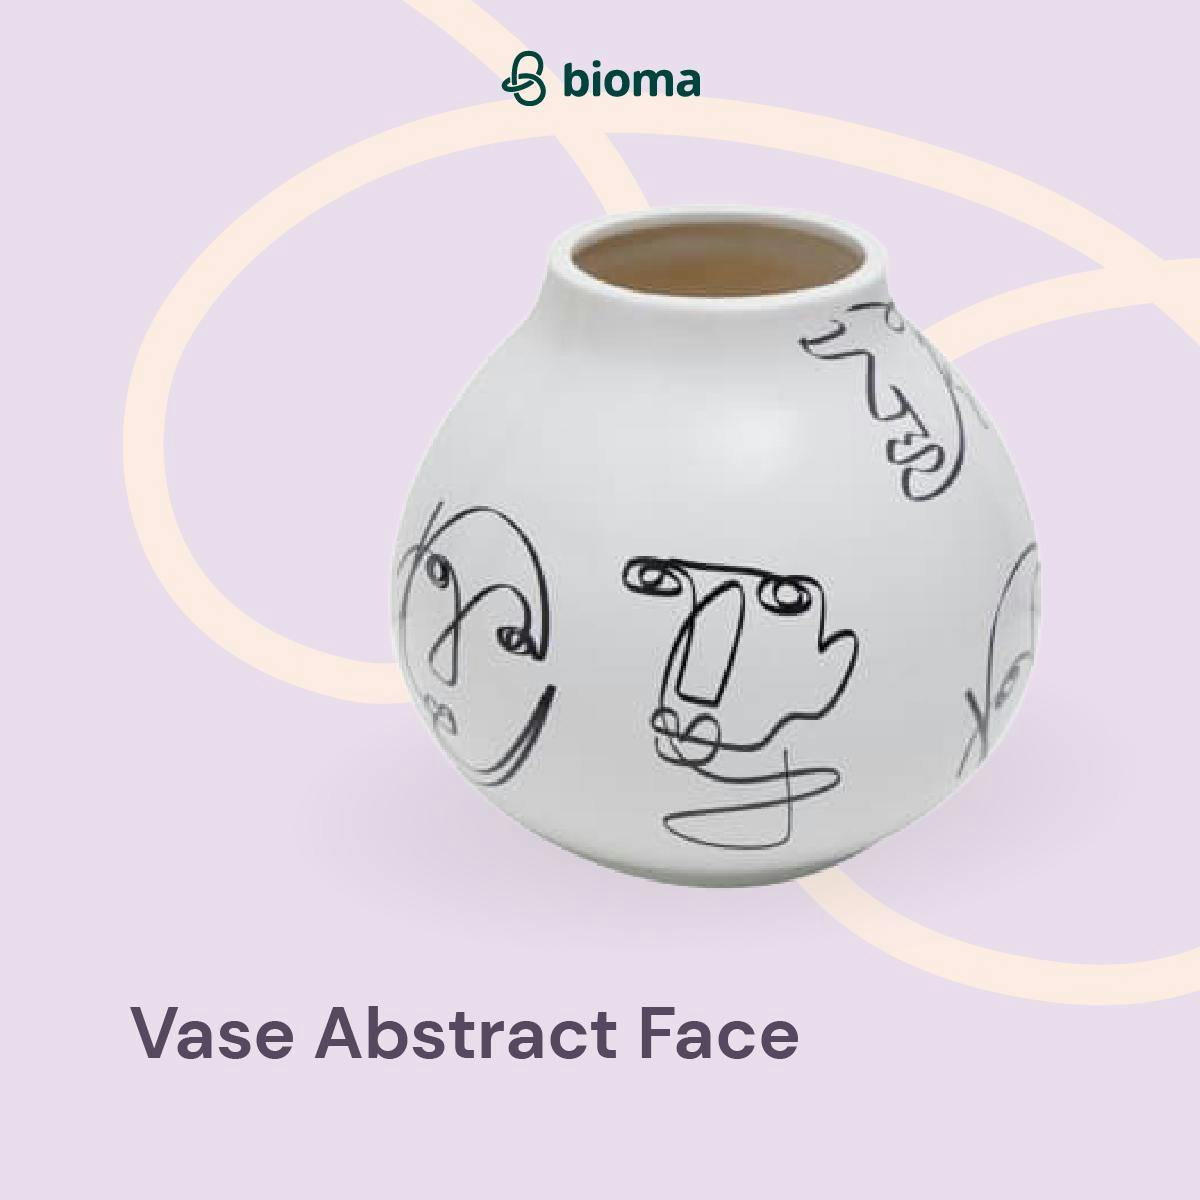 Image 437 Vase Abstract Face A2